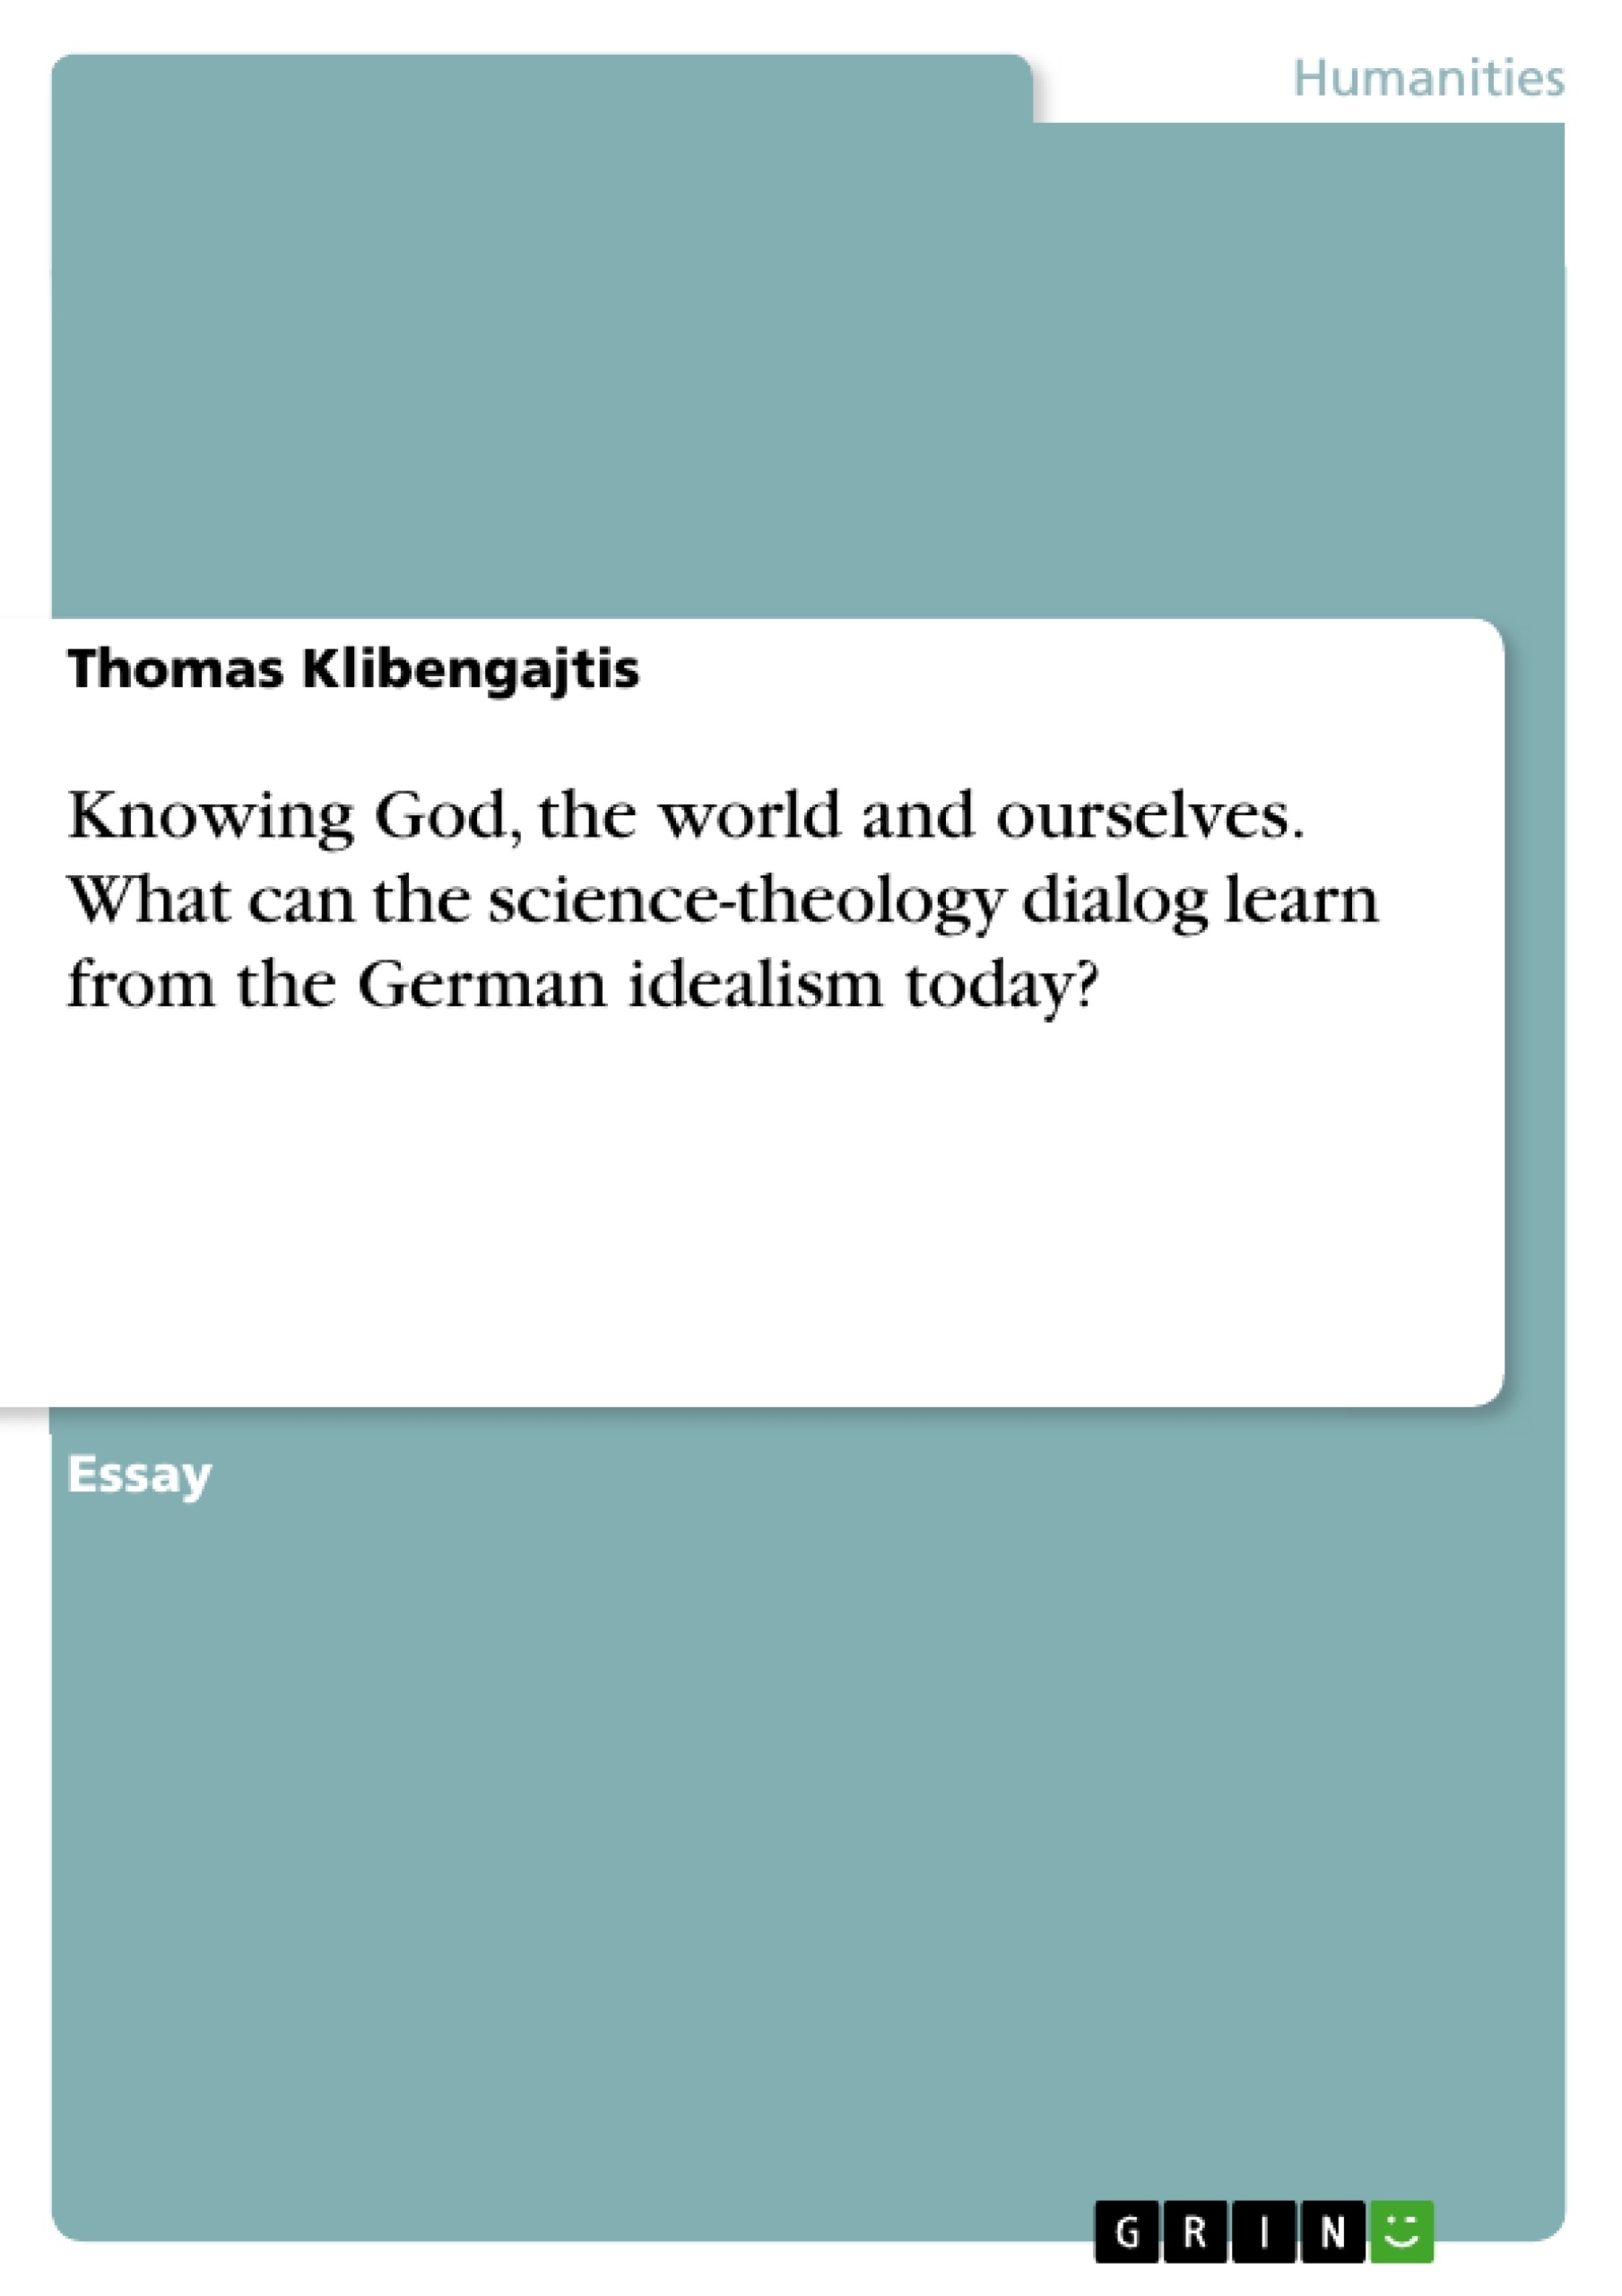 Titel: Knowing God, the world and ourselves. What can the science-theology dialog learn from the German idealism today?